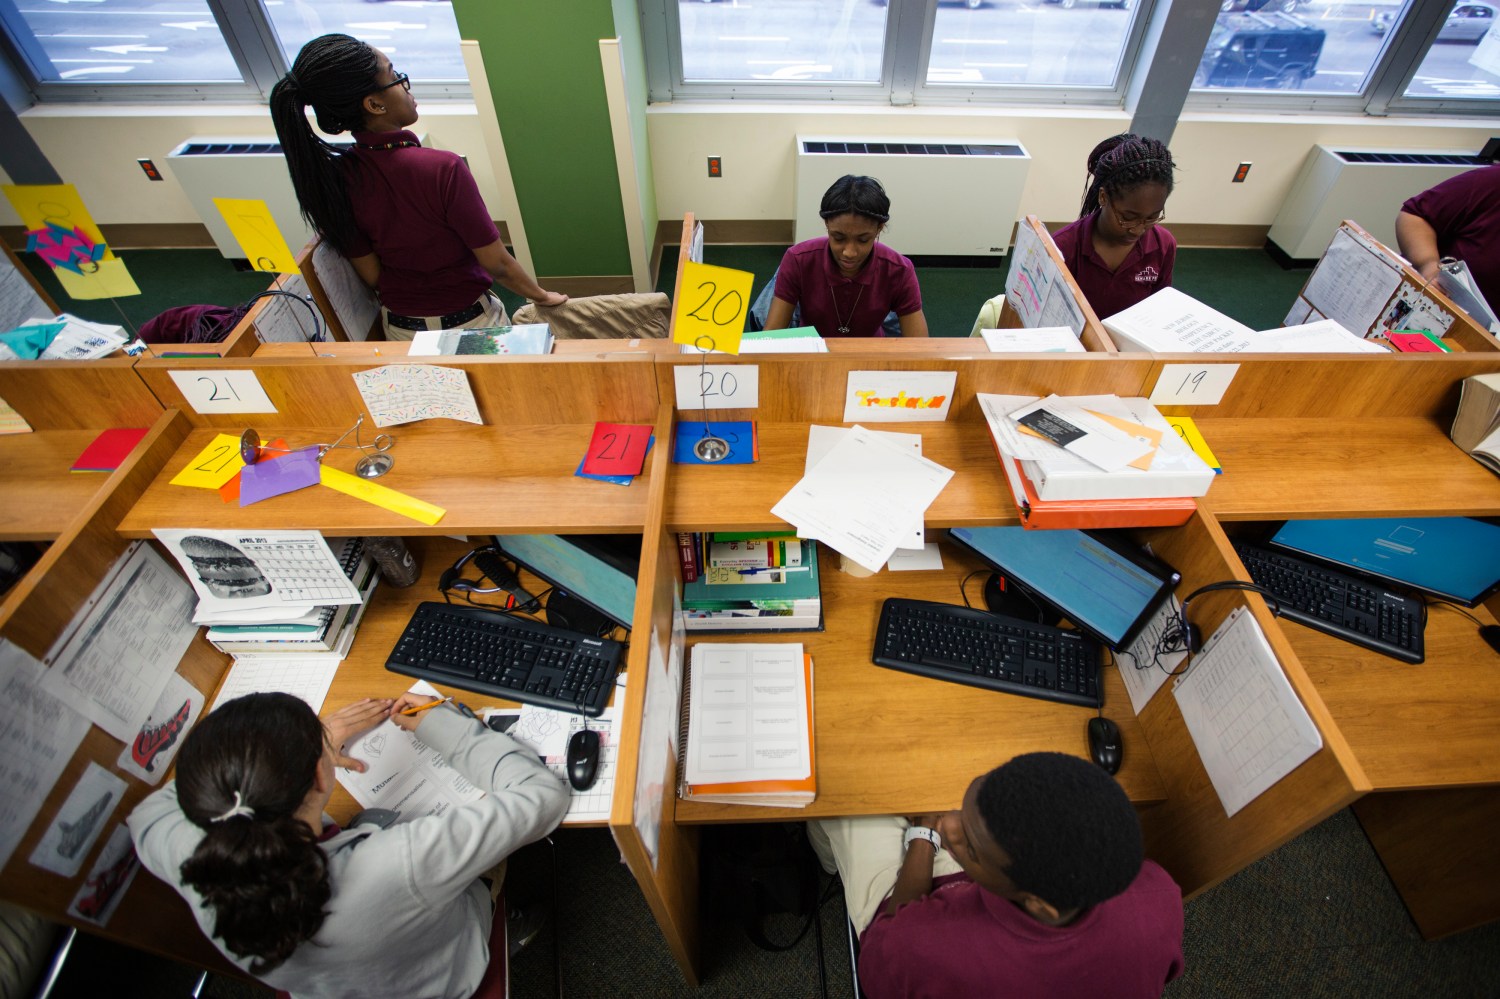 Newark Prep Charter School students sit at their desks studying at the school in Newark, New Jersey